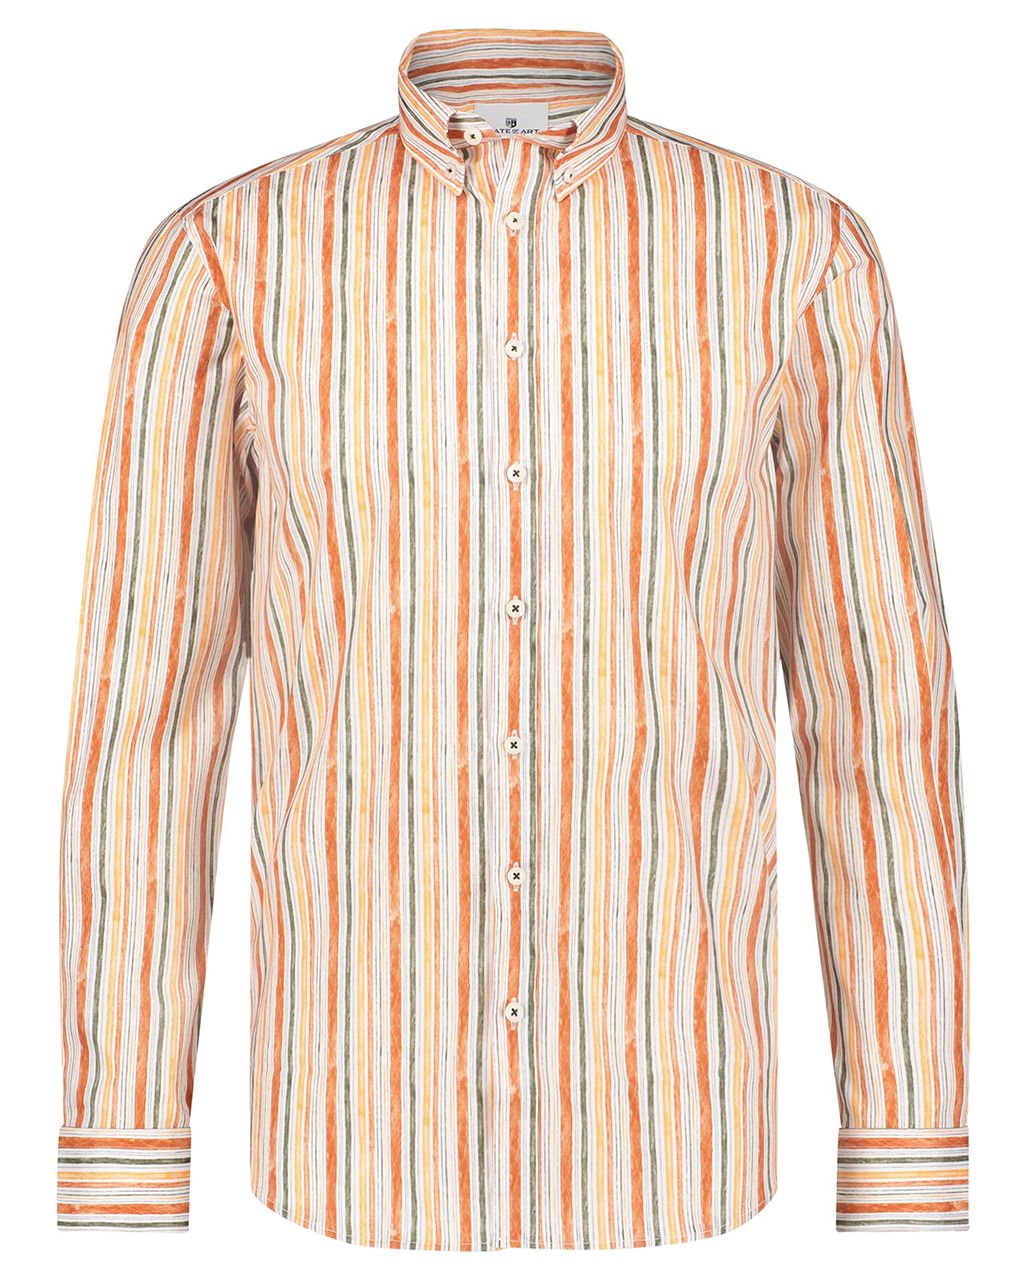 State of Art Casual Overhemd LM Oranje 075864-001-4XL